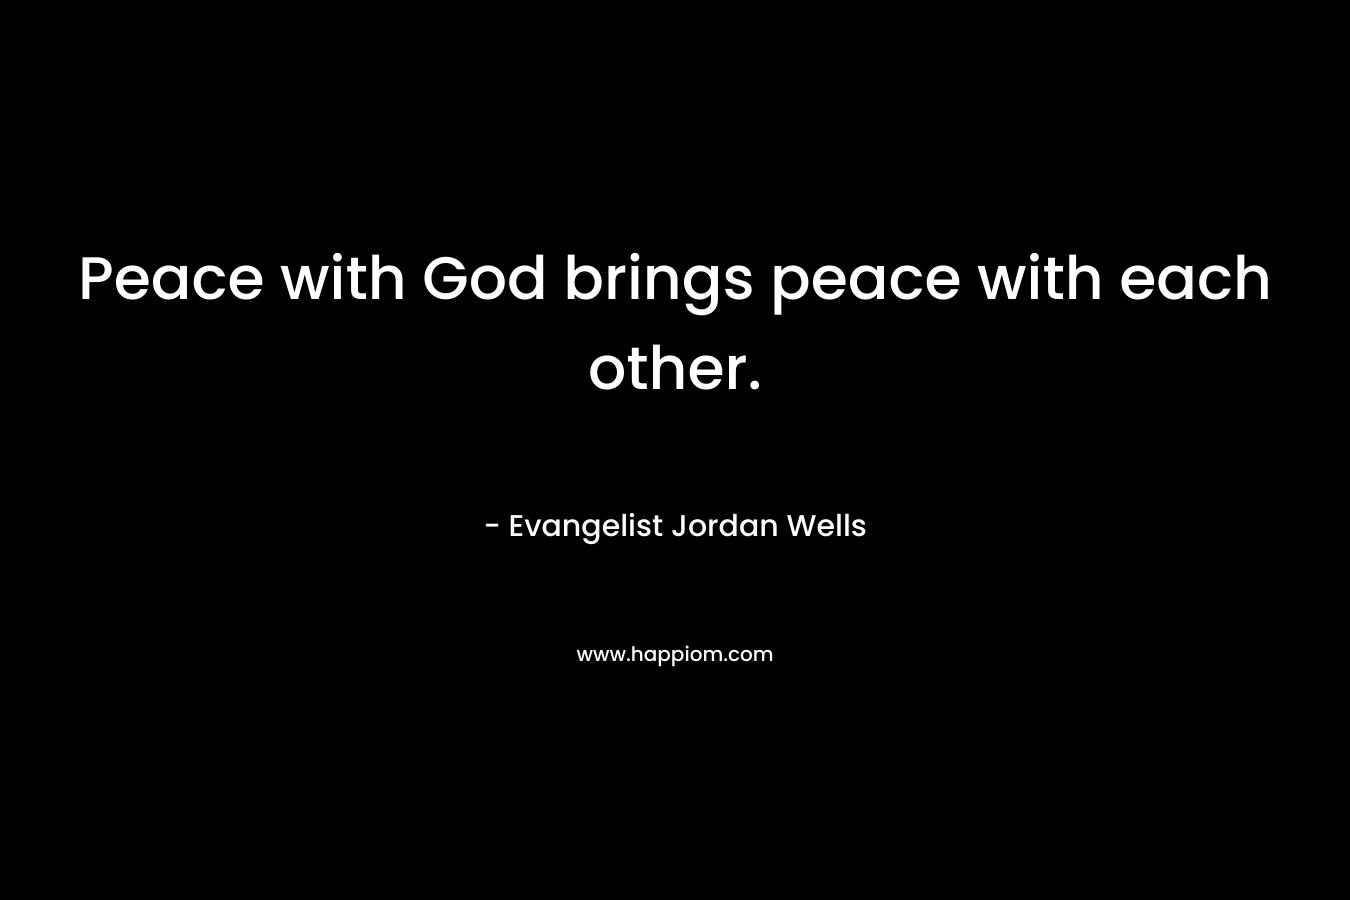 Peace with God brings peace with each other.